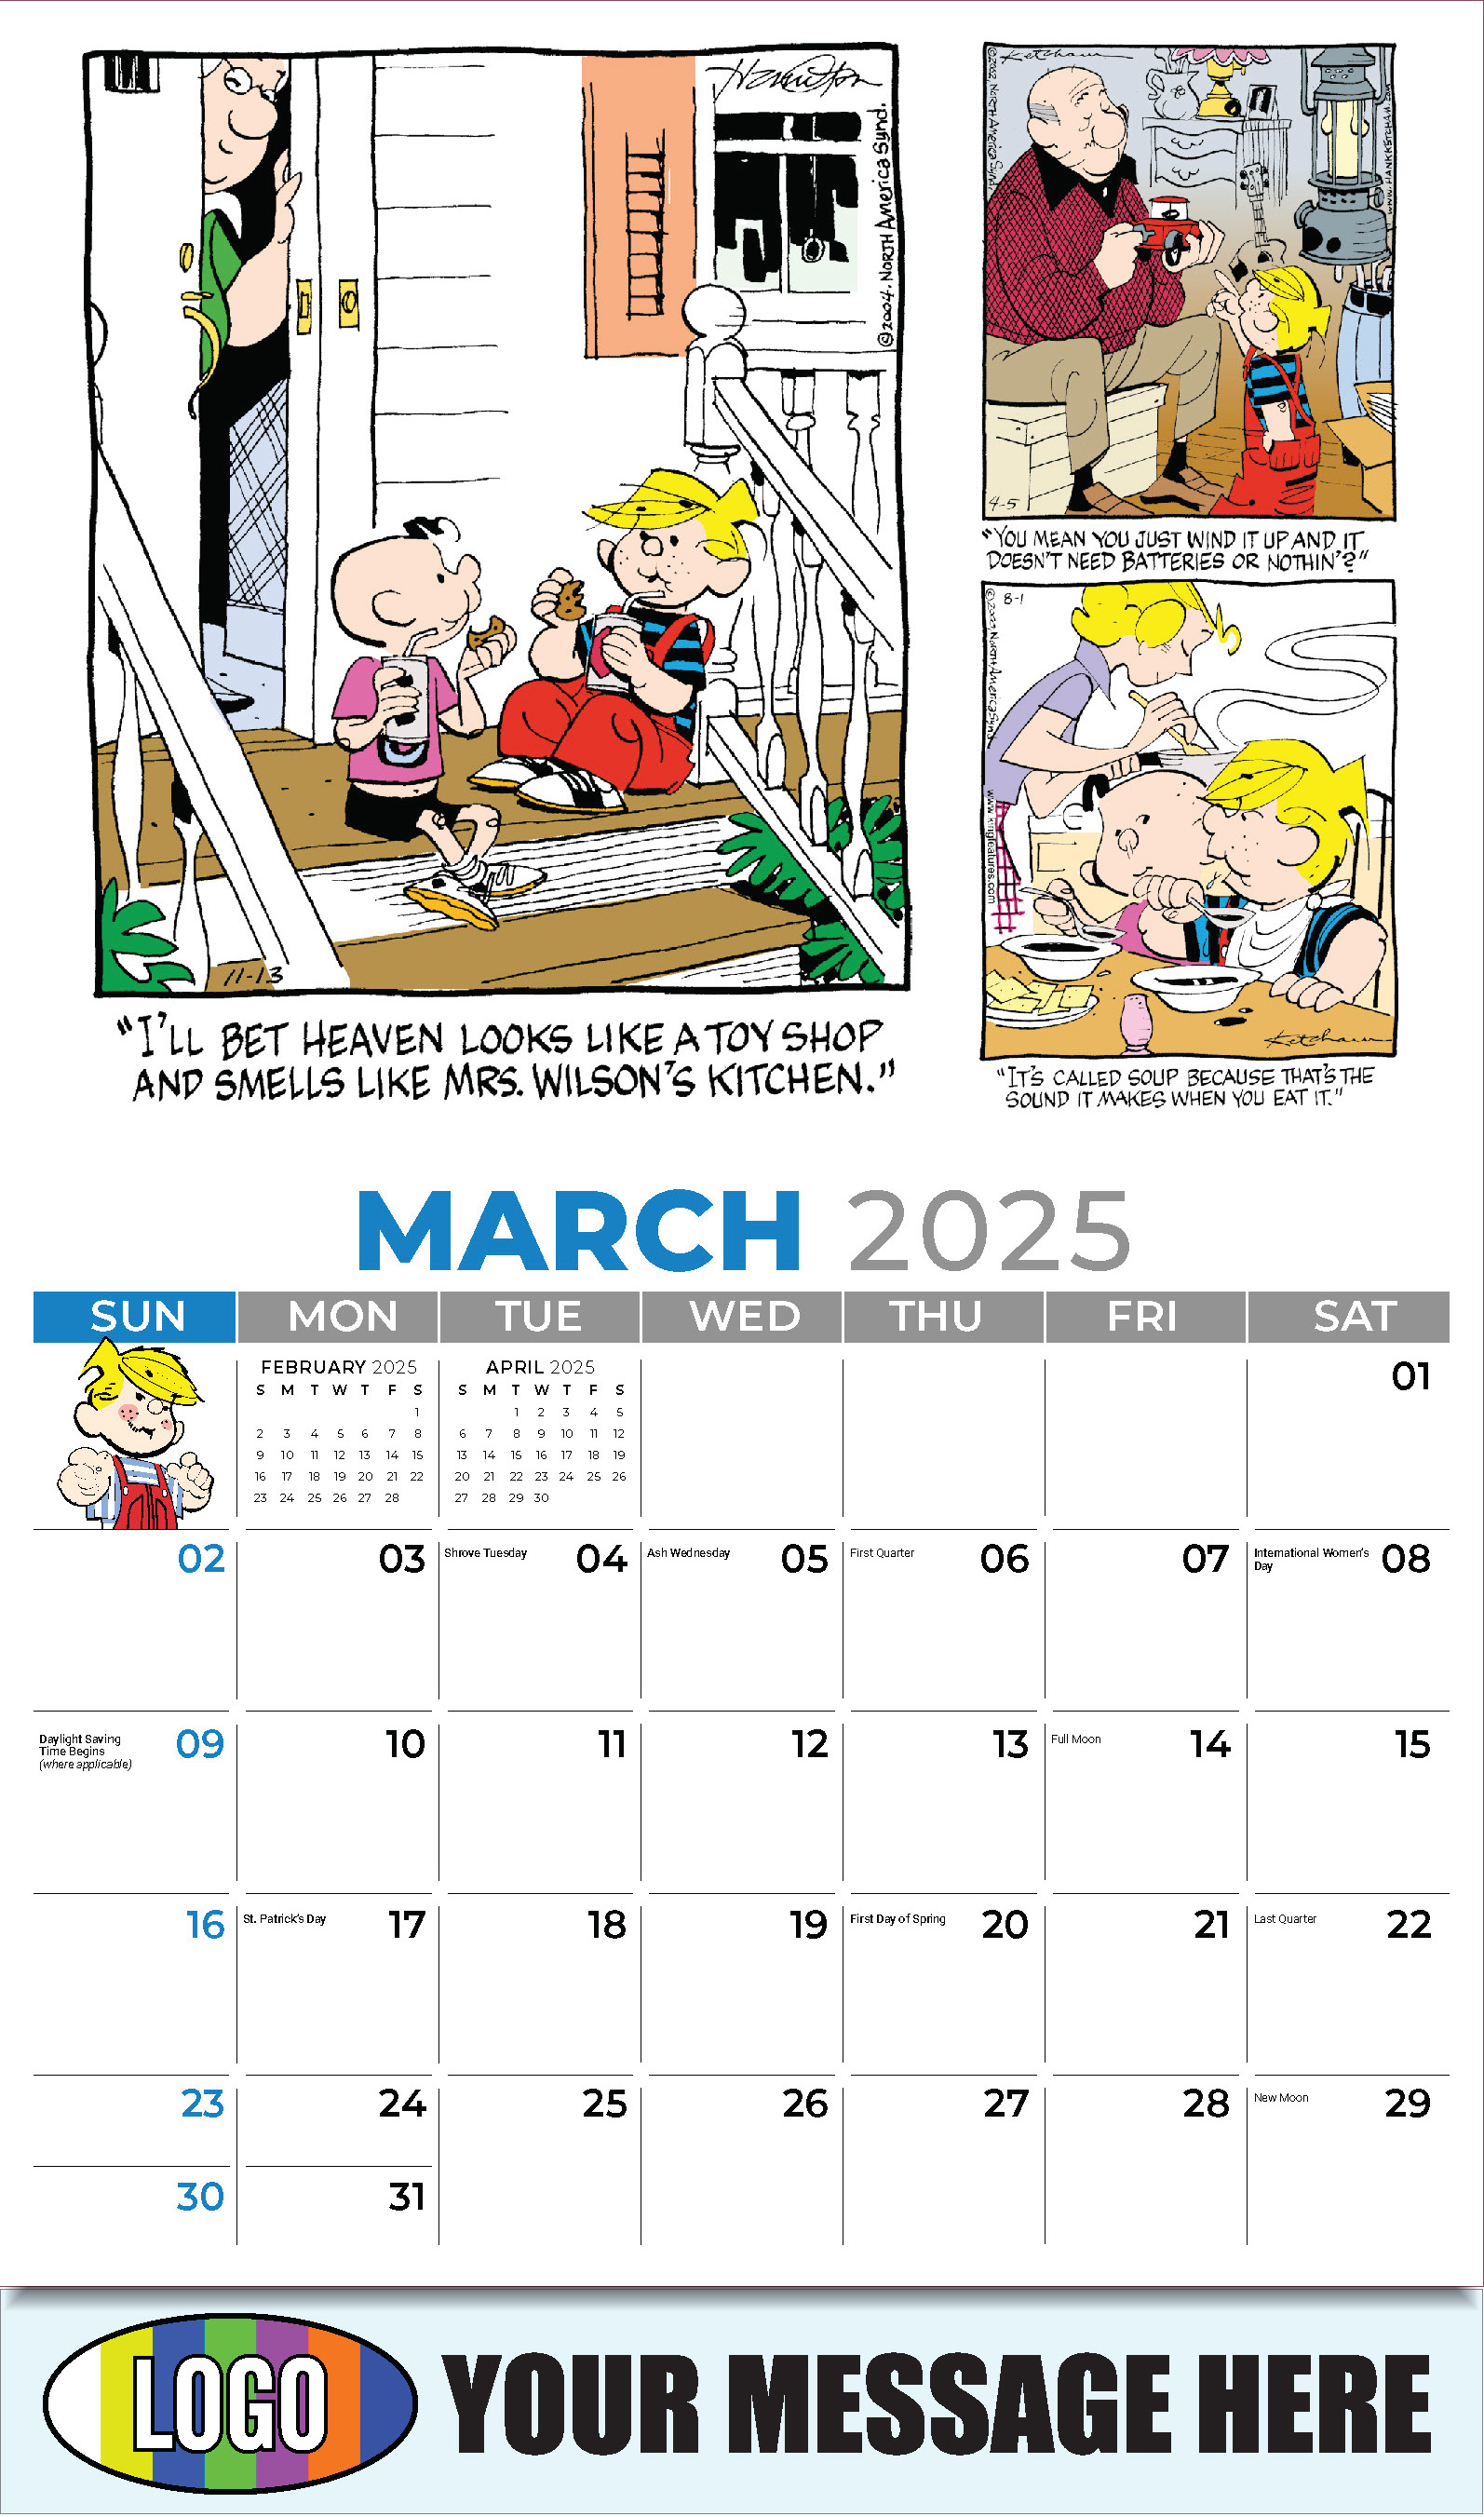 Dennis the Menace 2025 Business Promotional Wall Calendar - March